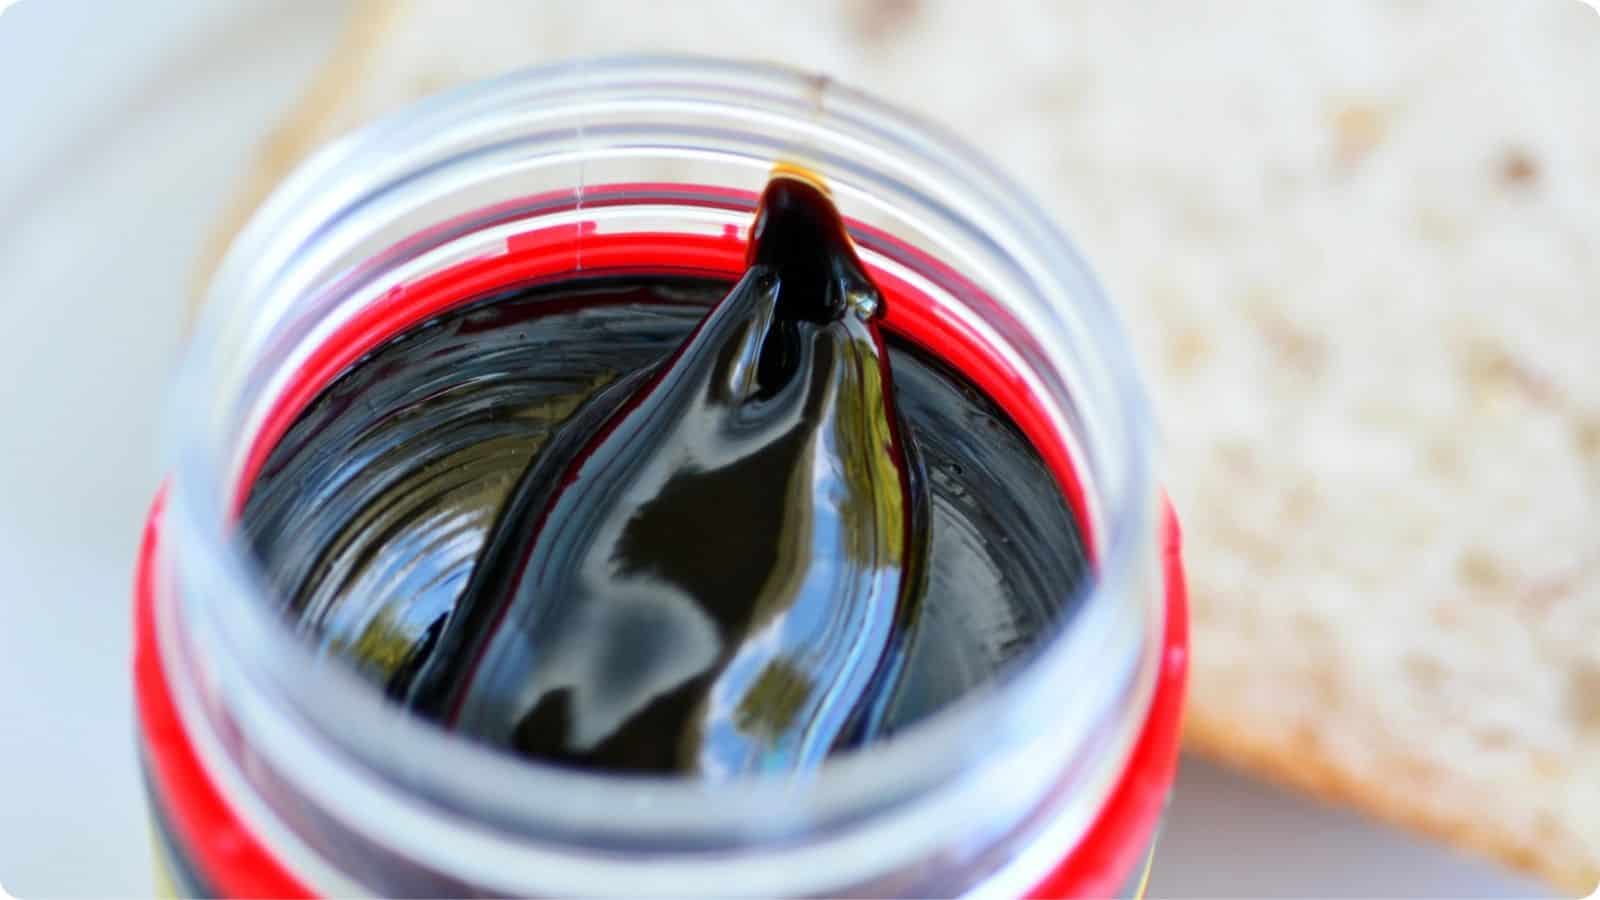 An open jar of Marmite is placed on a table.